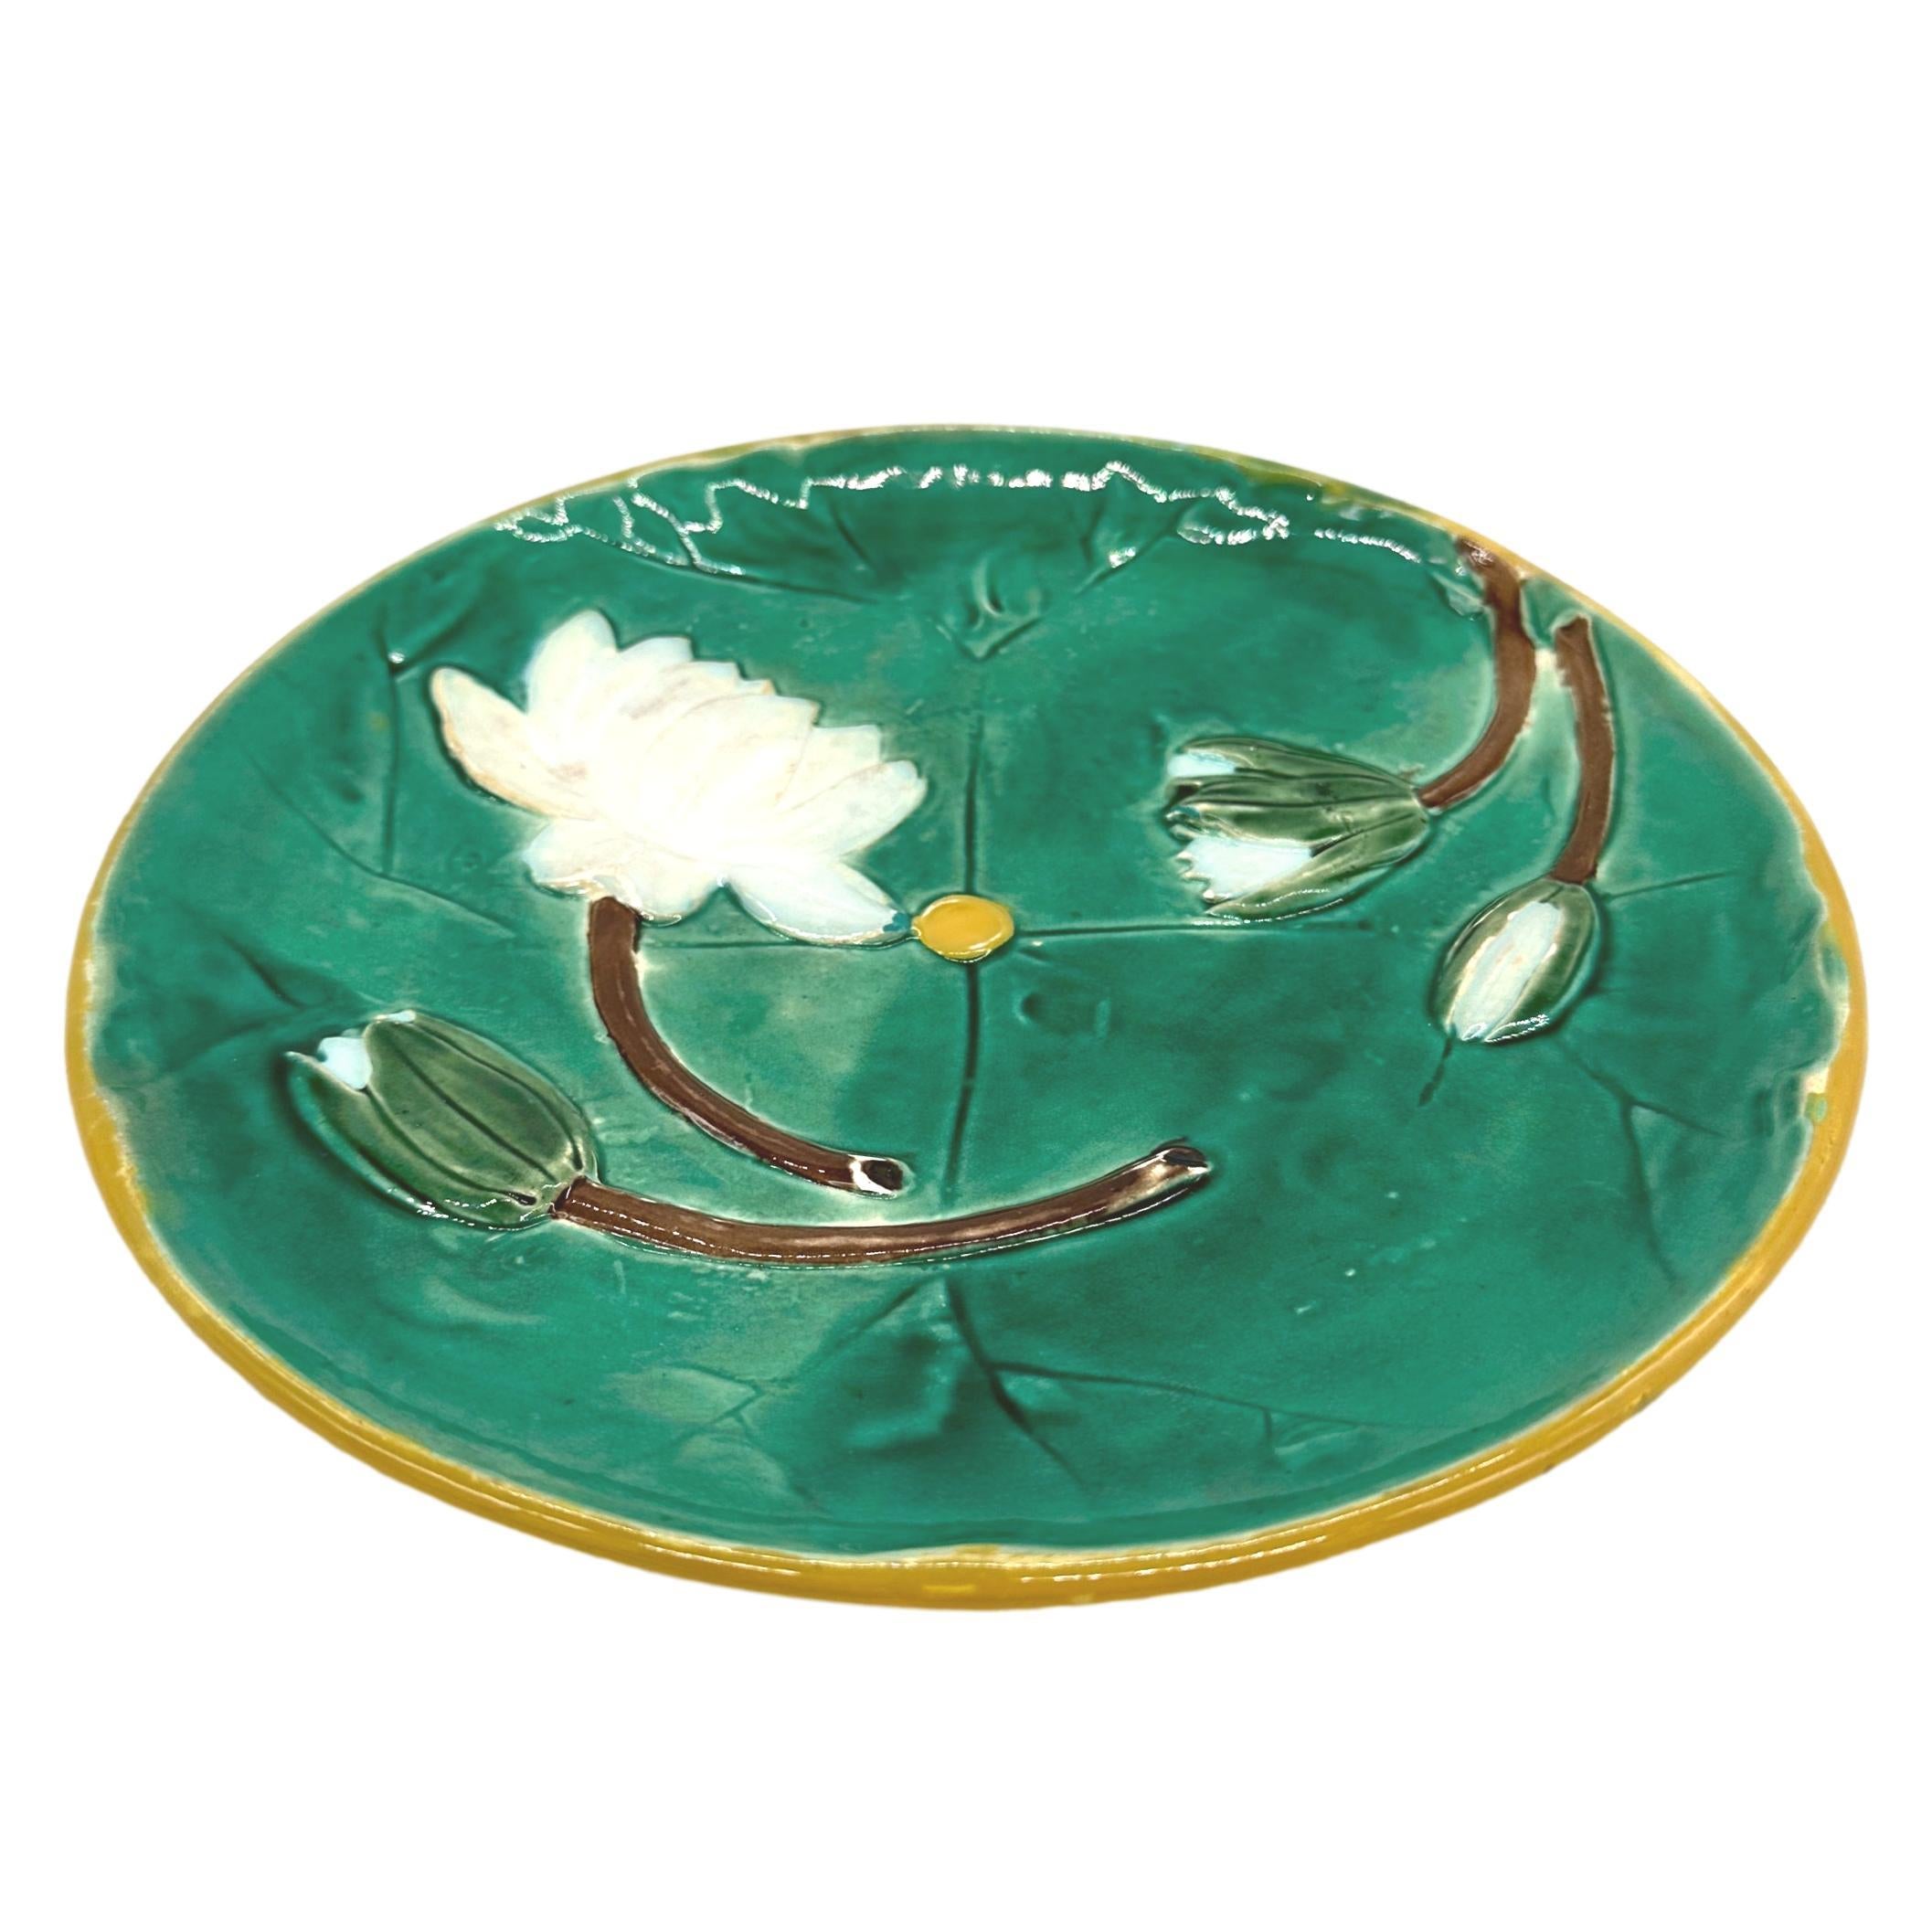 Joseph Holdcroft Majolica Pond Lily Plate, glazed in greens, and molded with flowering white lilies, with a yellow button to the center and bordered in yellow, the reverse with mottled glazing and impressed 'JH' monogram within a circle. 
BOOK